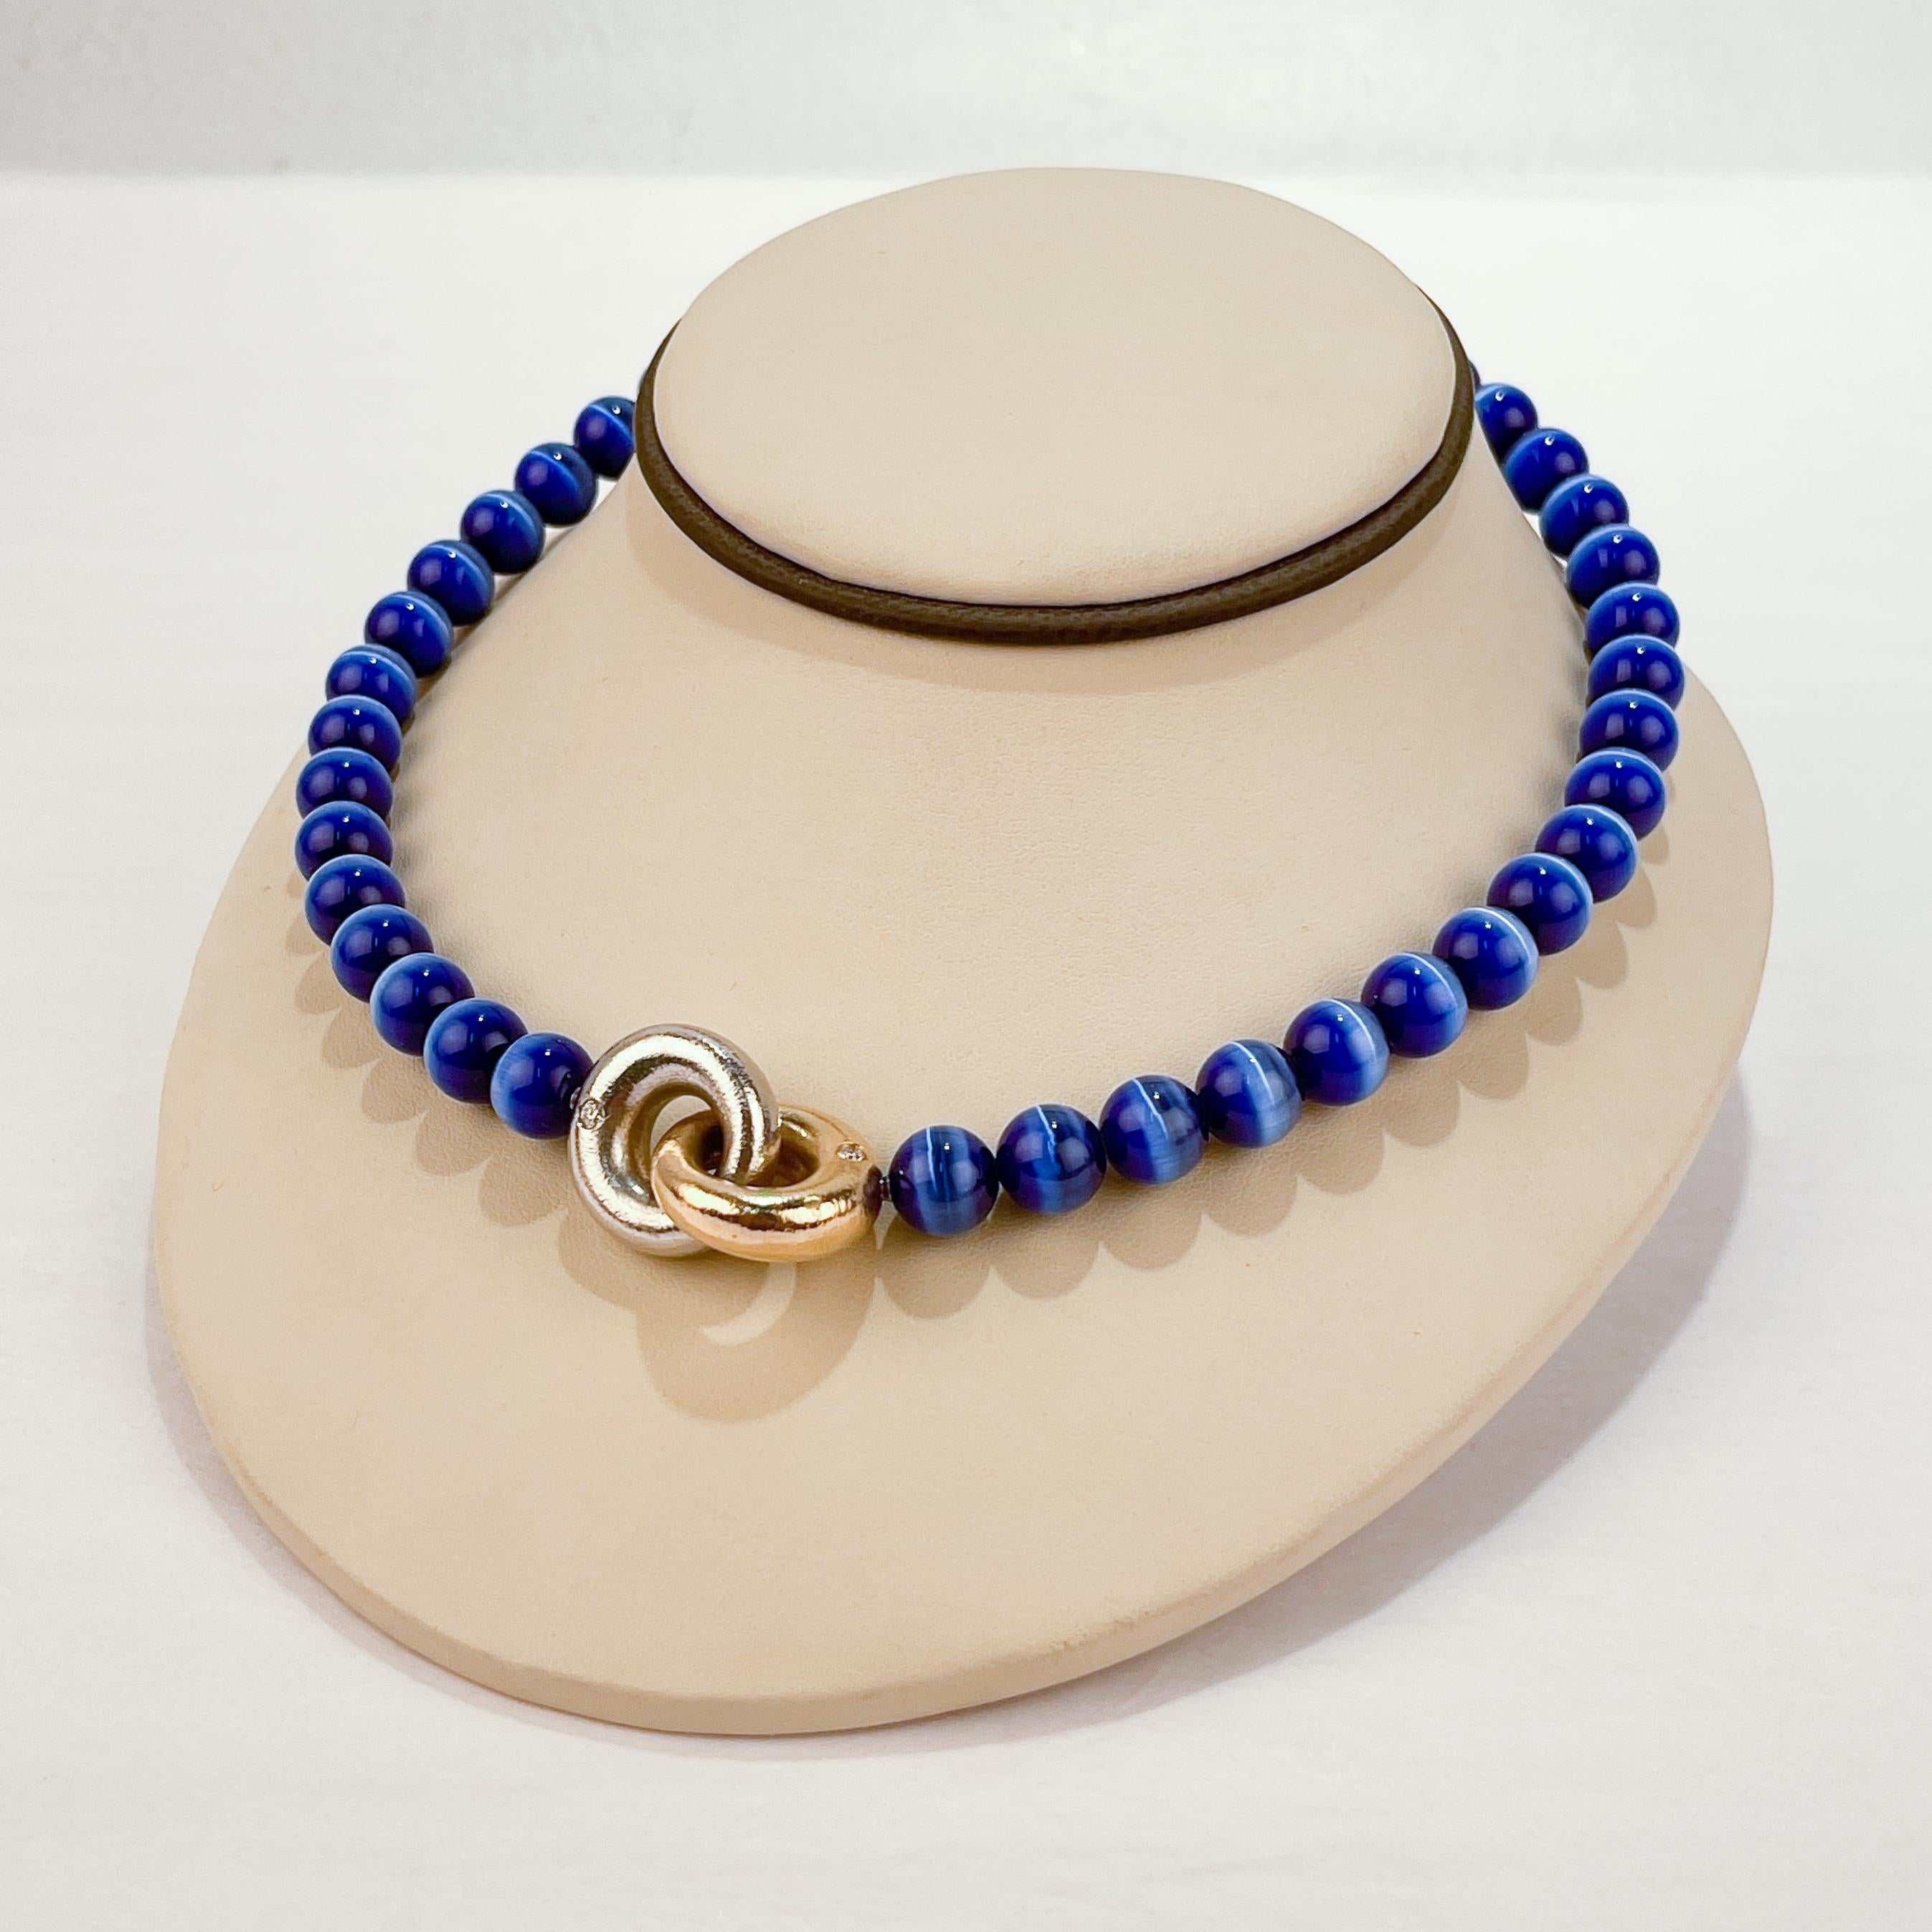 Modernist Ole Lynggaard 14k Gold & Blue Tiger's Eye Beaded Collier or Choker Necklace For Sale